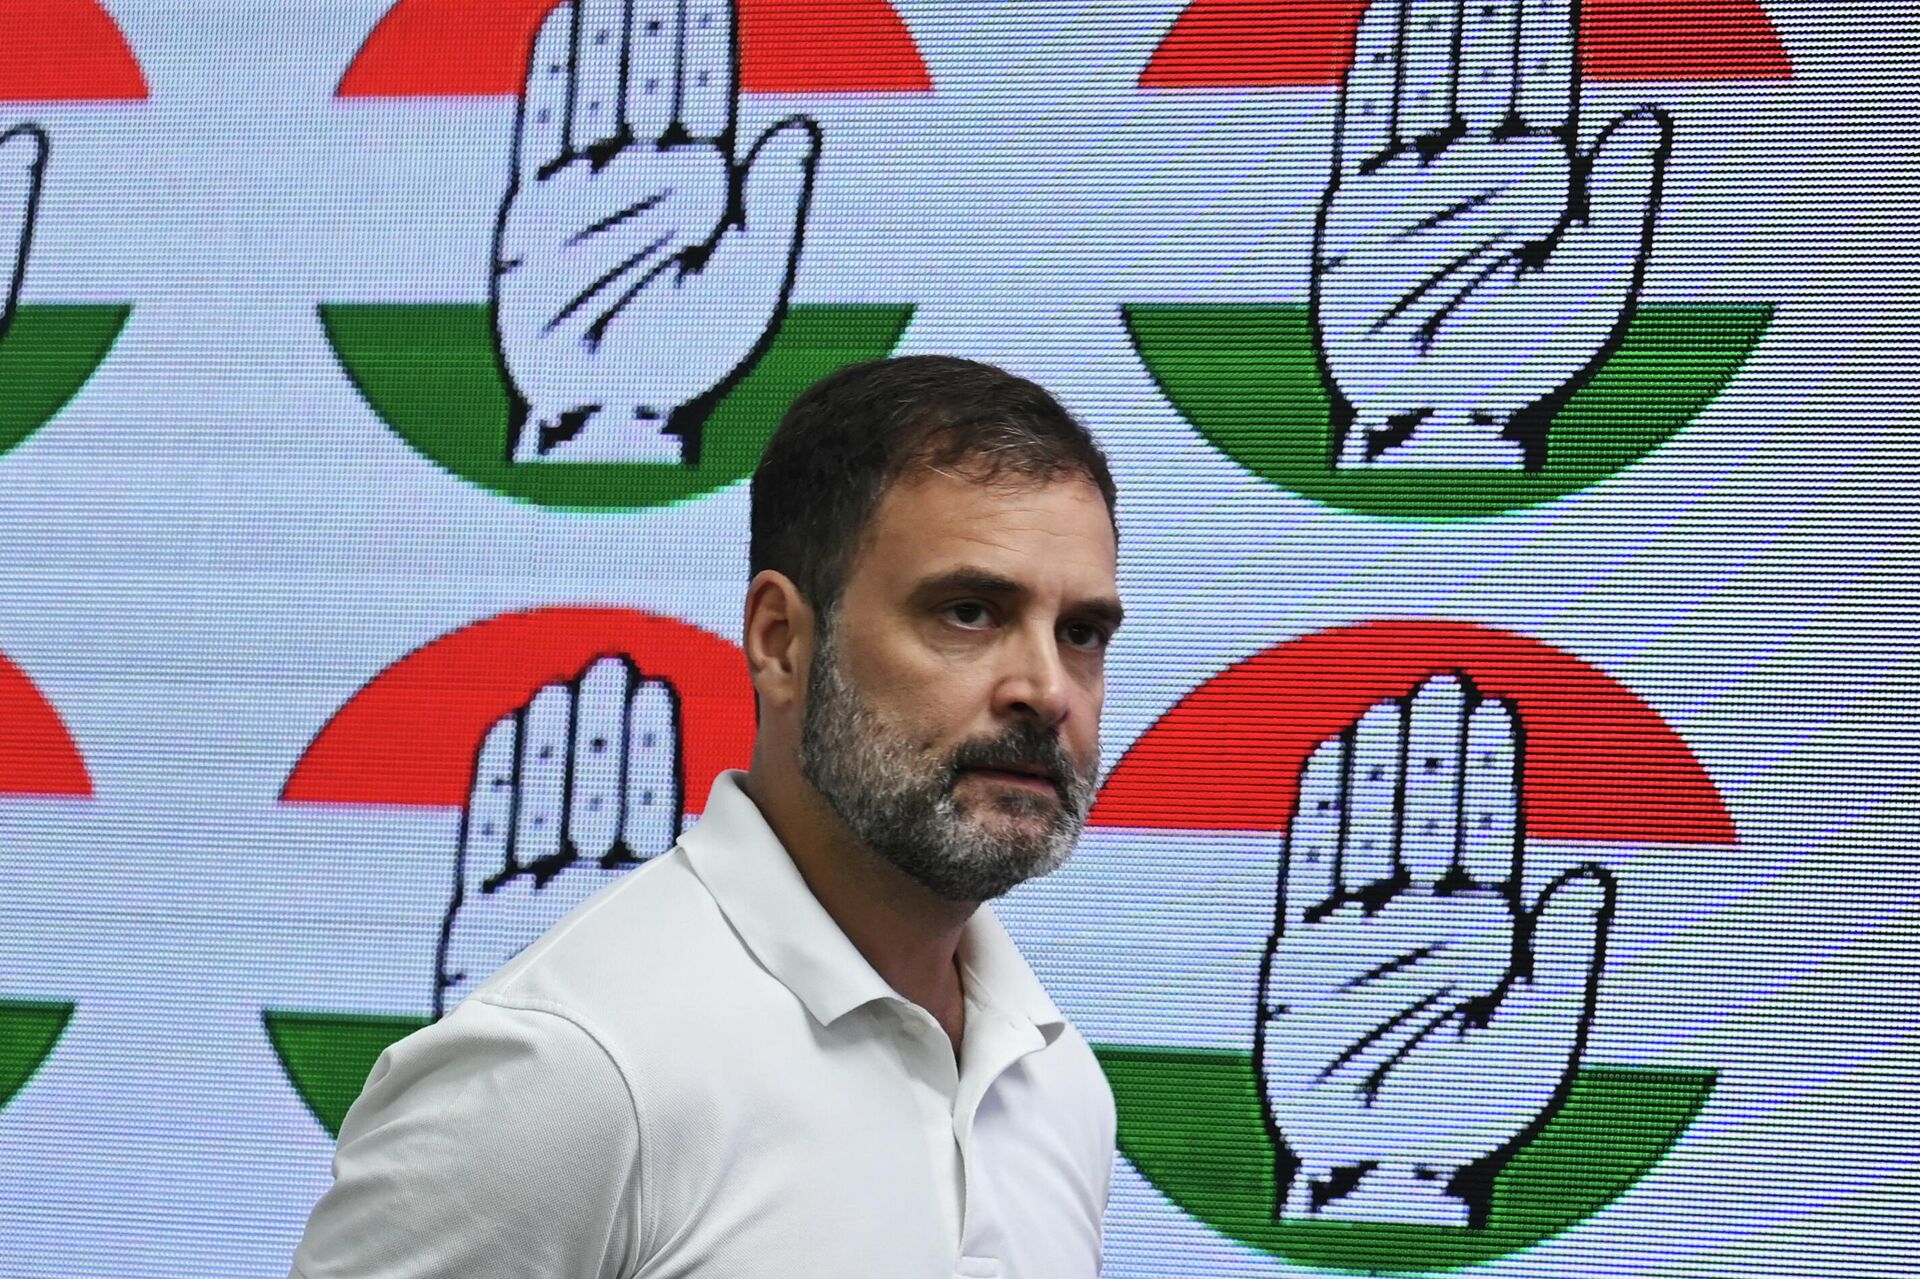 In this file photo taken on August 4, 2023, India's Congress party leader Rahul Gandhi arrives for a media briefing at the party headquarters in New Delhi, after the Supreme Court suspended his defamation conviction. India's main opposition leader Rahul Gandhi was restored to parliament on August 7 after the country's Supreme Court last week suspended his defamation conviction over his political comments on Prime Minister Narendra Modi. The 53-year-old Congress party leader was sentenced to two years' imprisonment in March in a case that critics flagged as an effort to stifle political opposition in the world's largest democracy. - Sputnik India, 1920, 18.08.2023